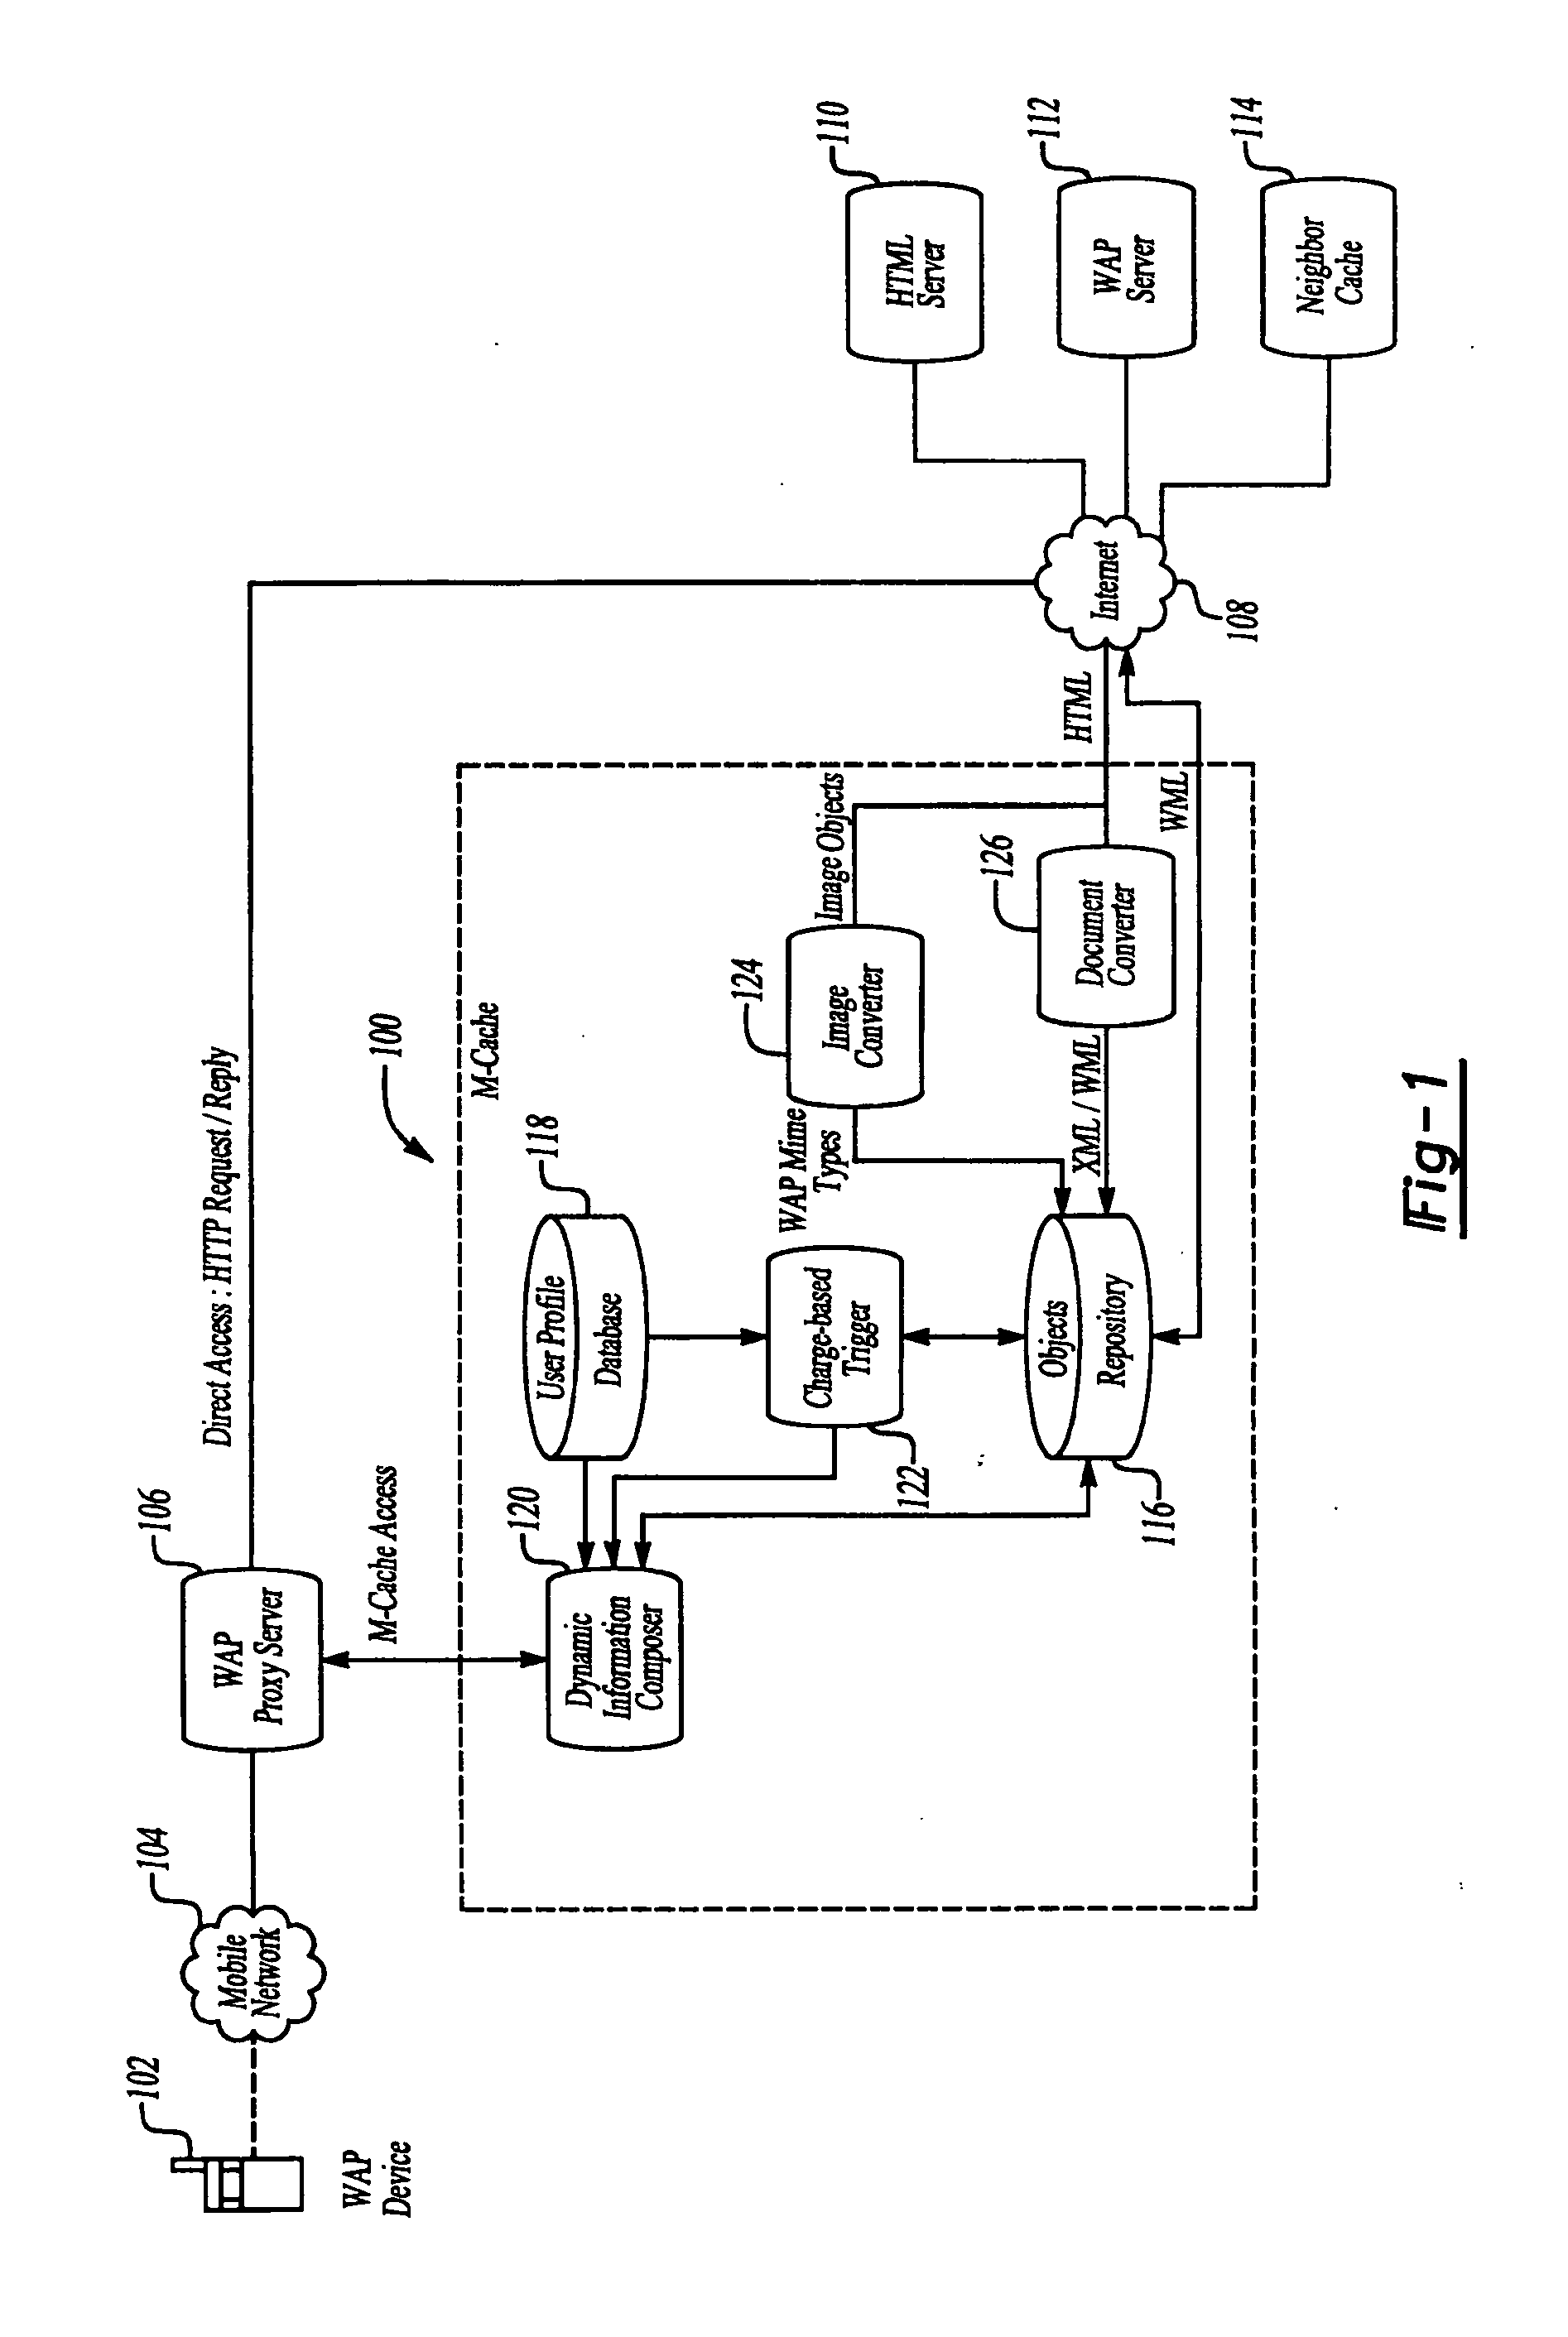 Mobile cache for dynamically composing user-specific information